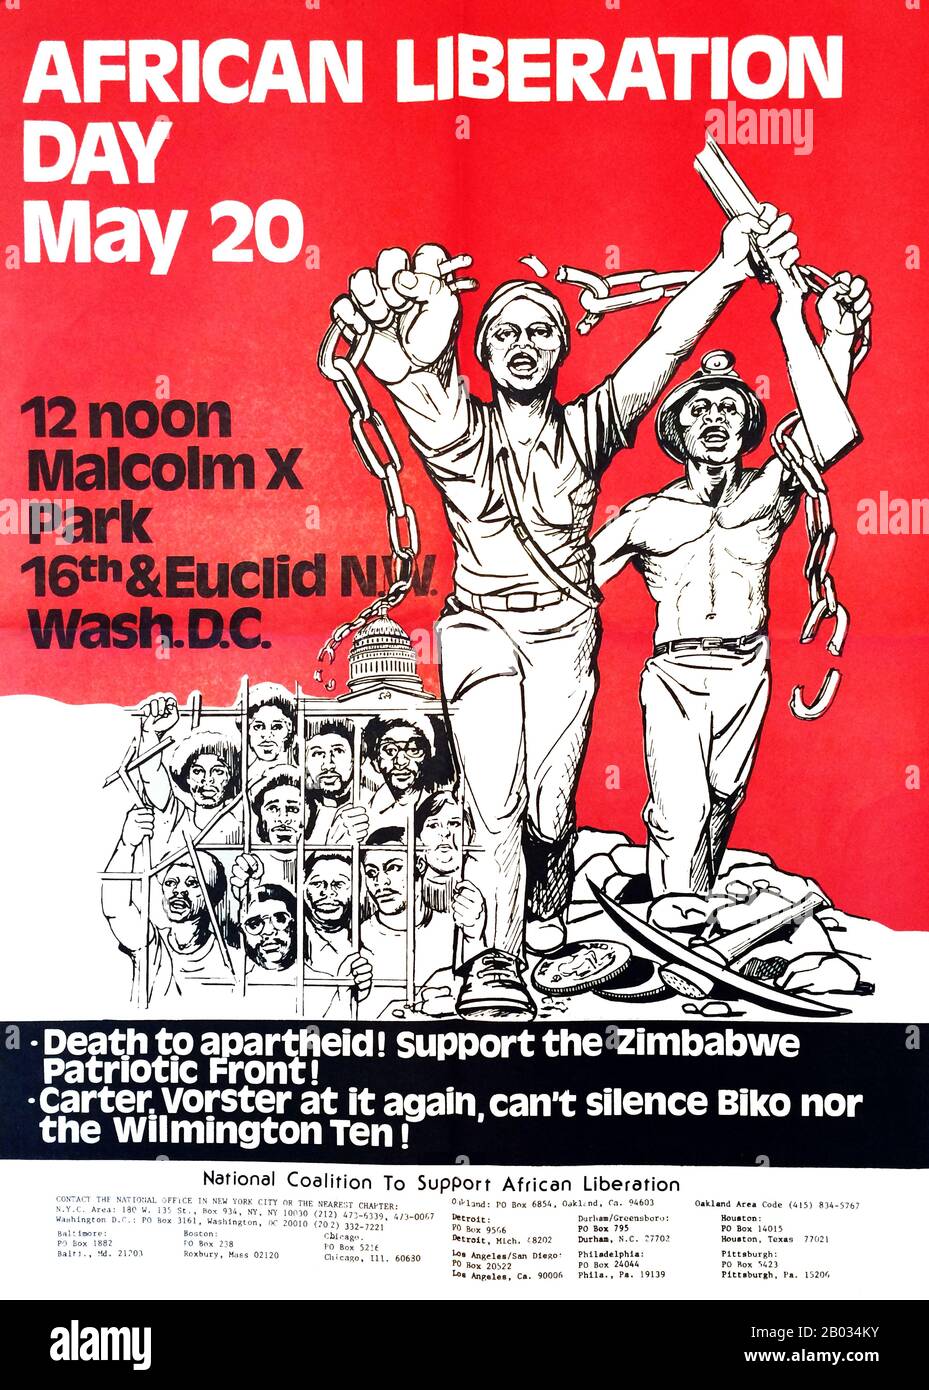 This poster is held in the South African Anti-Apartheid archives of Mark Kane. Kane was involved in the Anti-Apartheid Movement first through his work with the American Friends Service Committee in West Michigan and later with the Institute for Global Education.  What is instructive about the poster is that it addresses the larger African Freedom struggle in both South Africa and Zimbabwe, linking it with the parallel struggle in the United States. Stock Photo